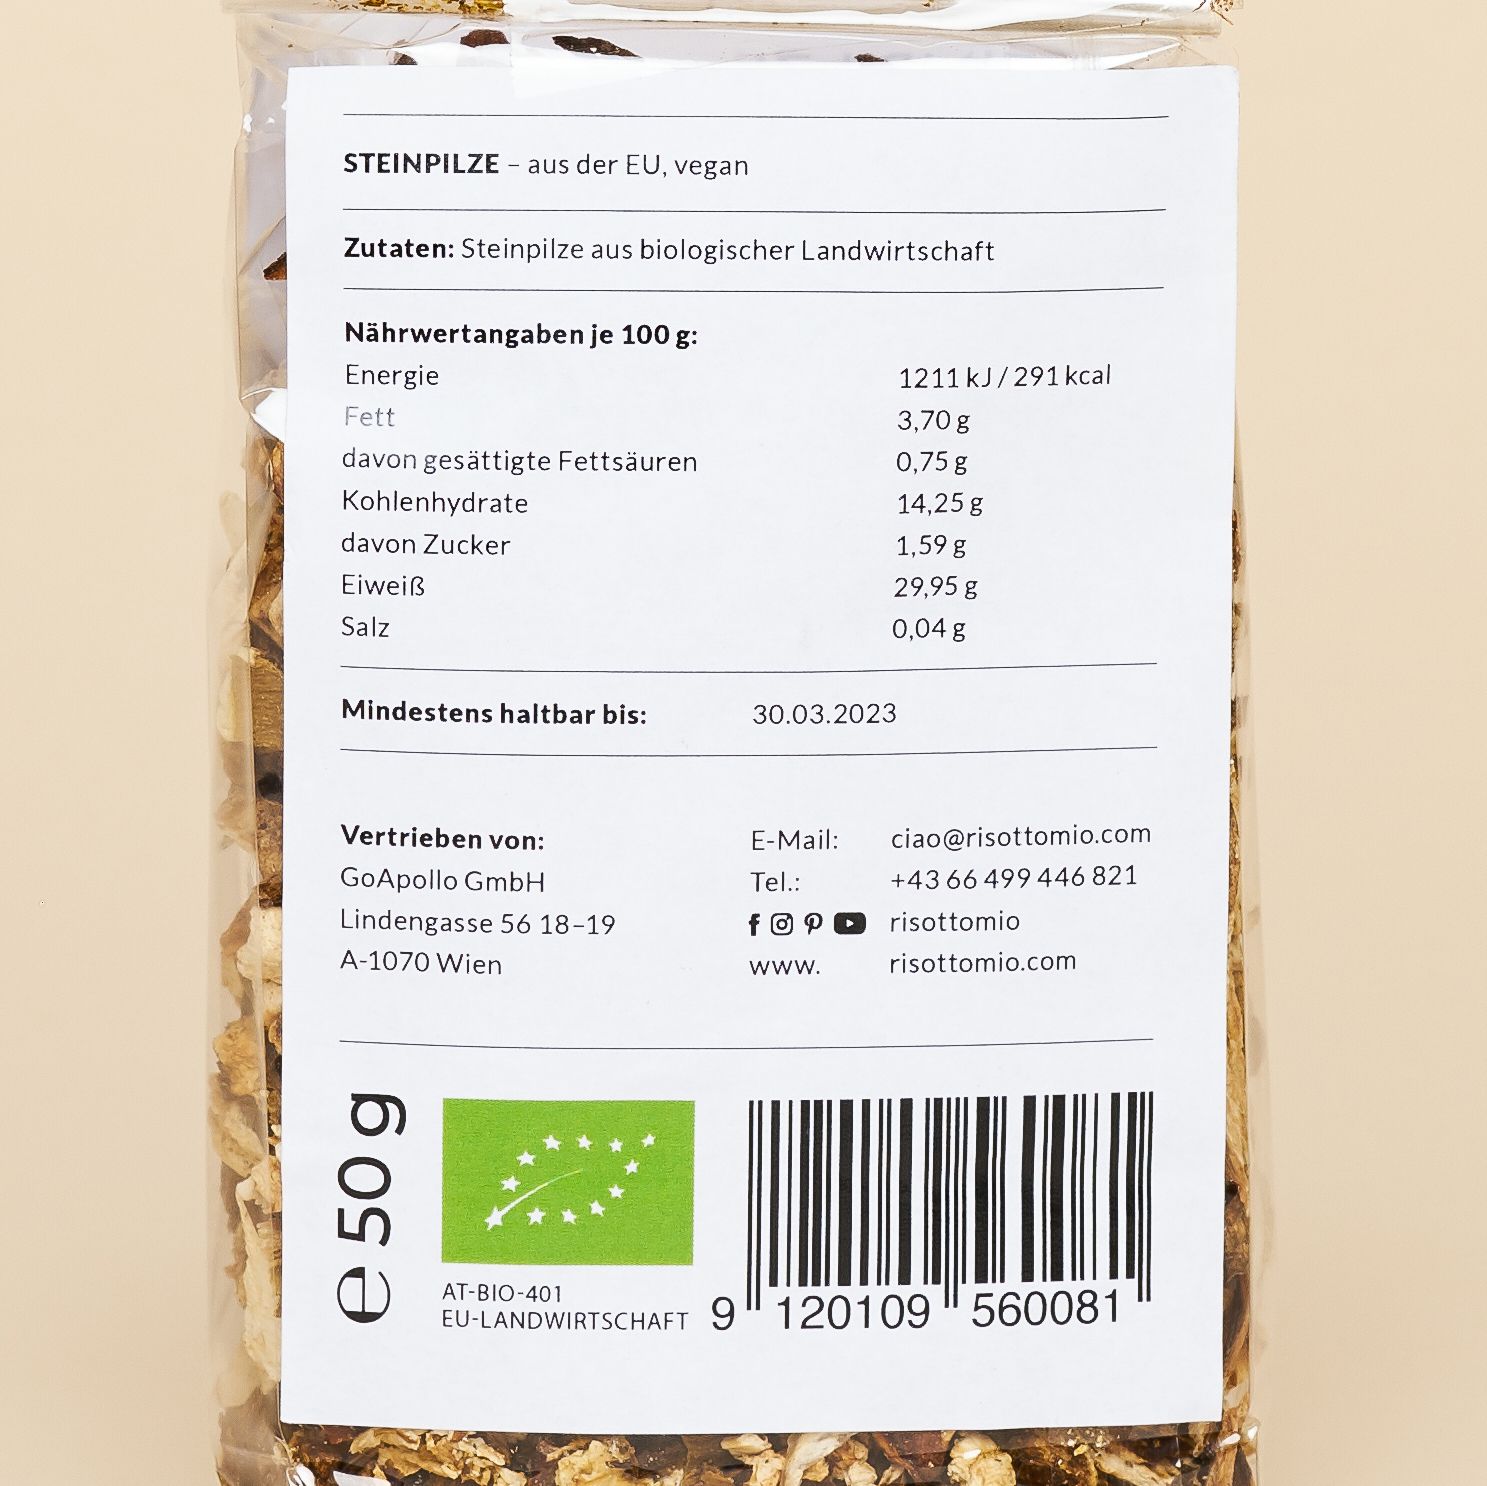 A clear bag with a large white label with a clean, modern Italian label. Inside, dried porcini mushrooms.